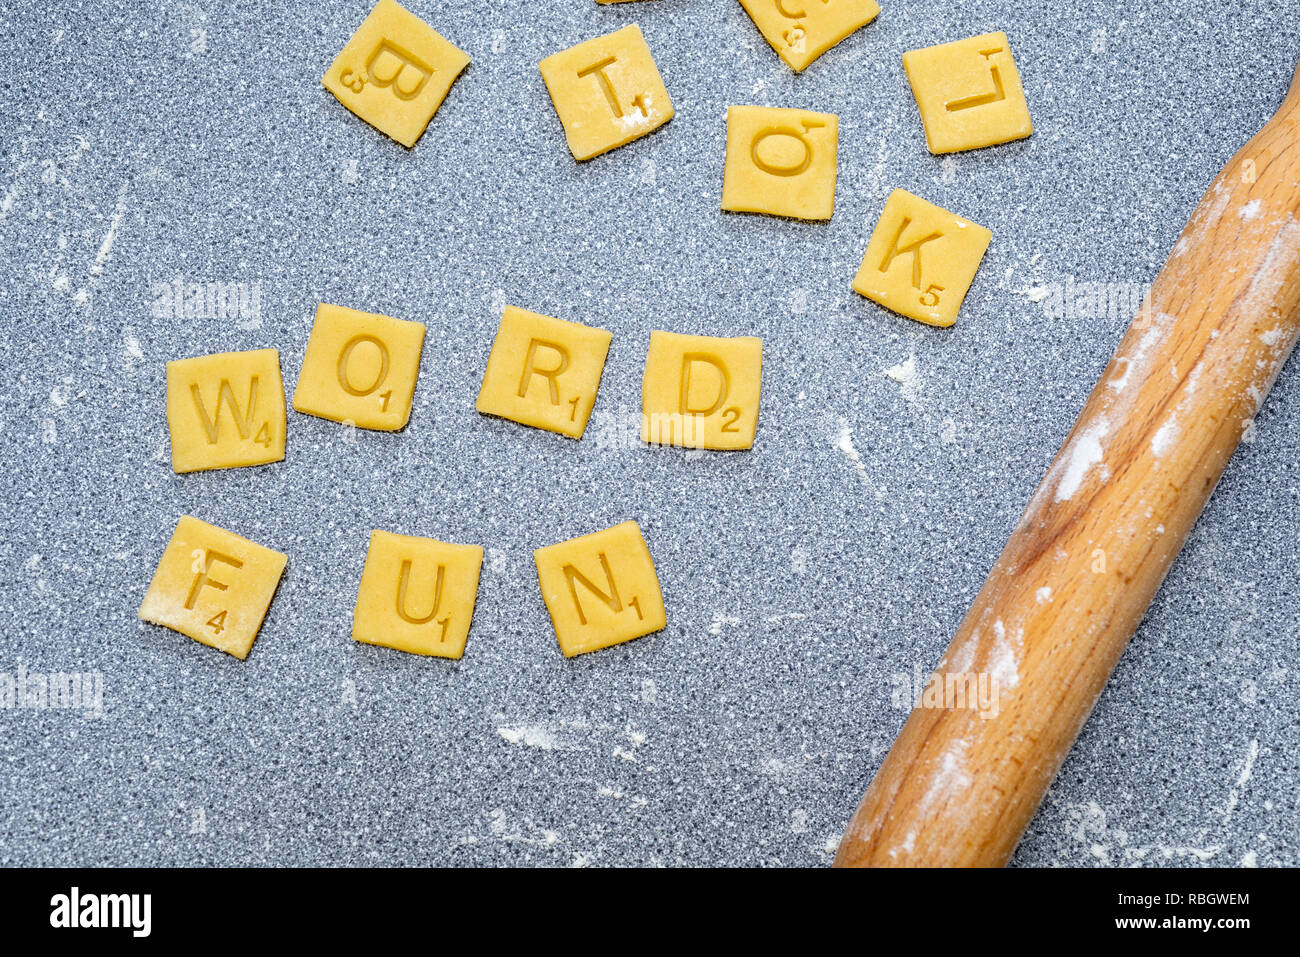 Word fun - scrabble words made from biscuit / cookie dough. Stock Photo